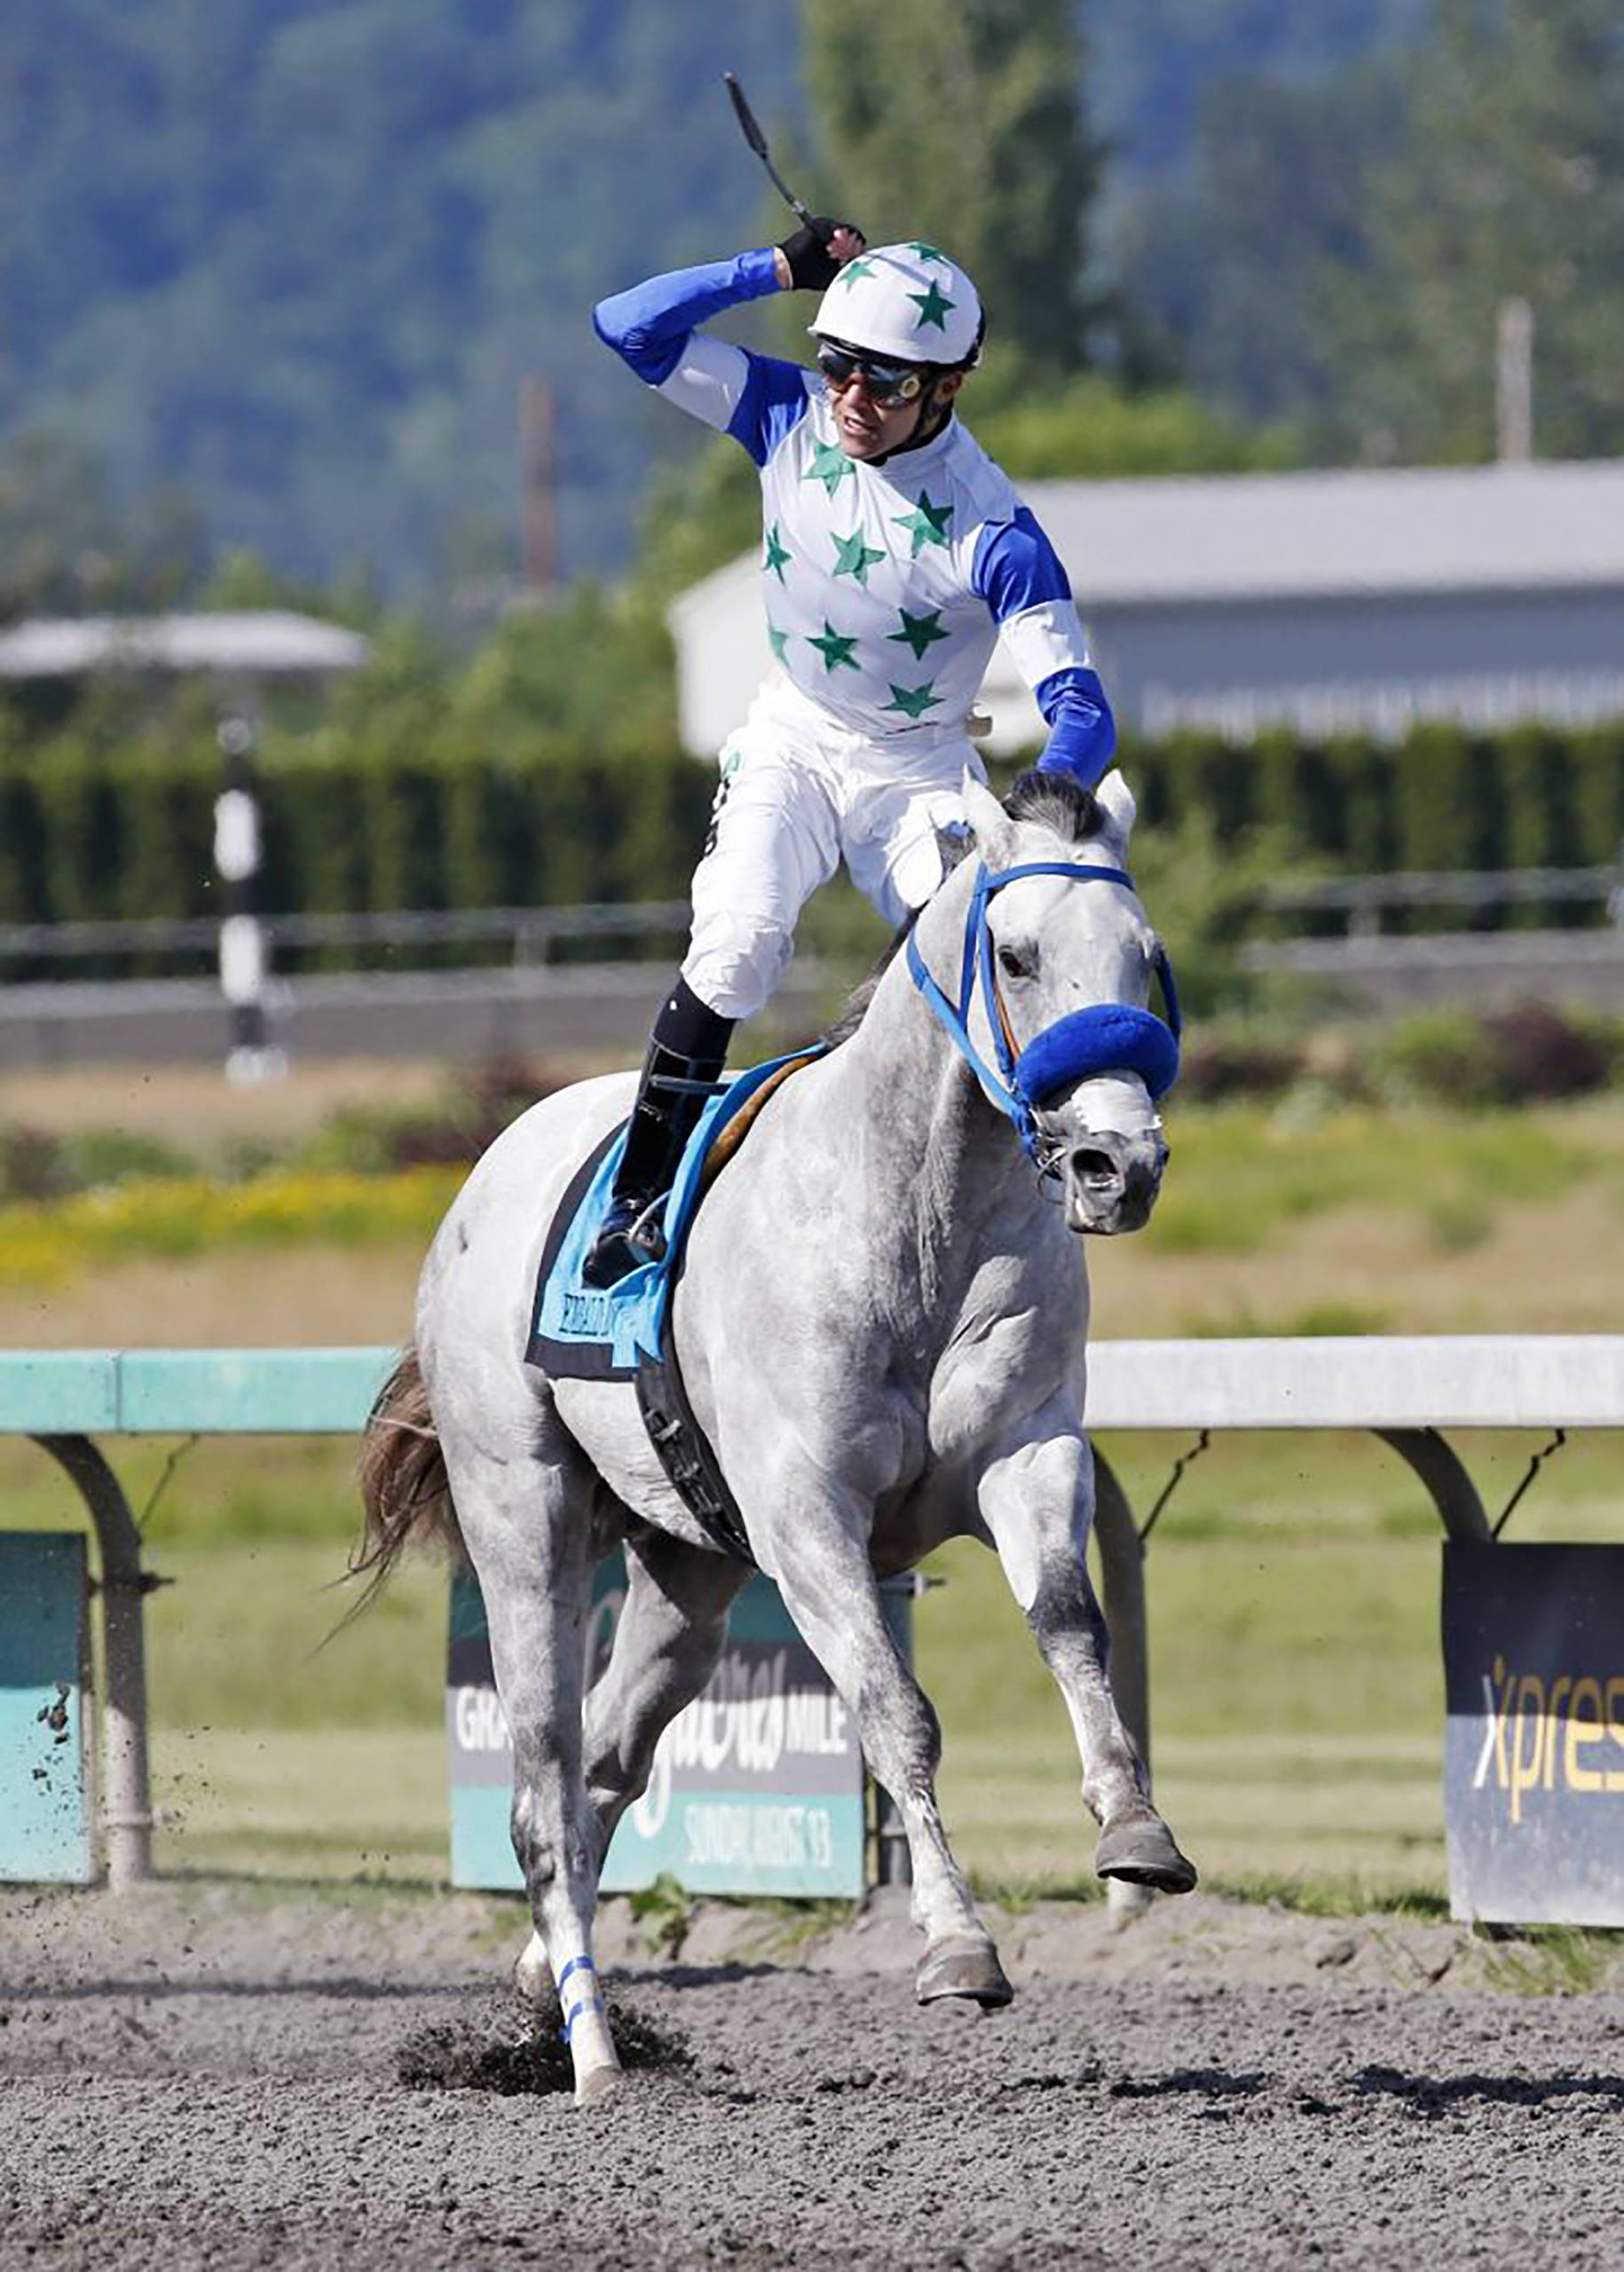 Eswan Flores exults after guiding Riser to a resounding win in the $50,000 Coca-Cola Stakes for 3-year-old colts and geldings on Sunday. COURTESY PHOTO, Emerald Downs.